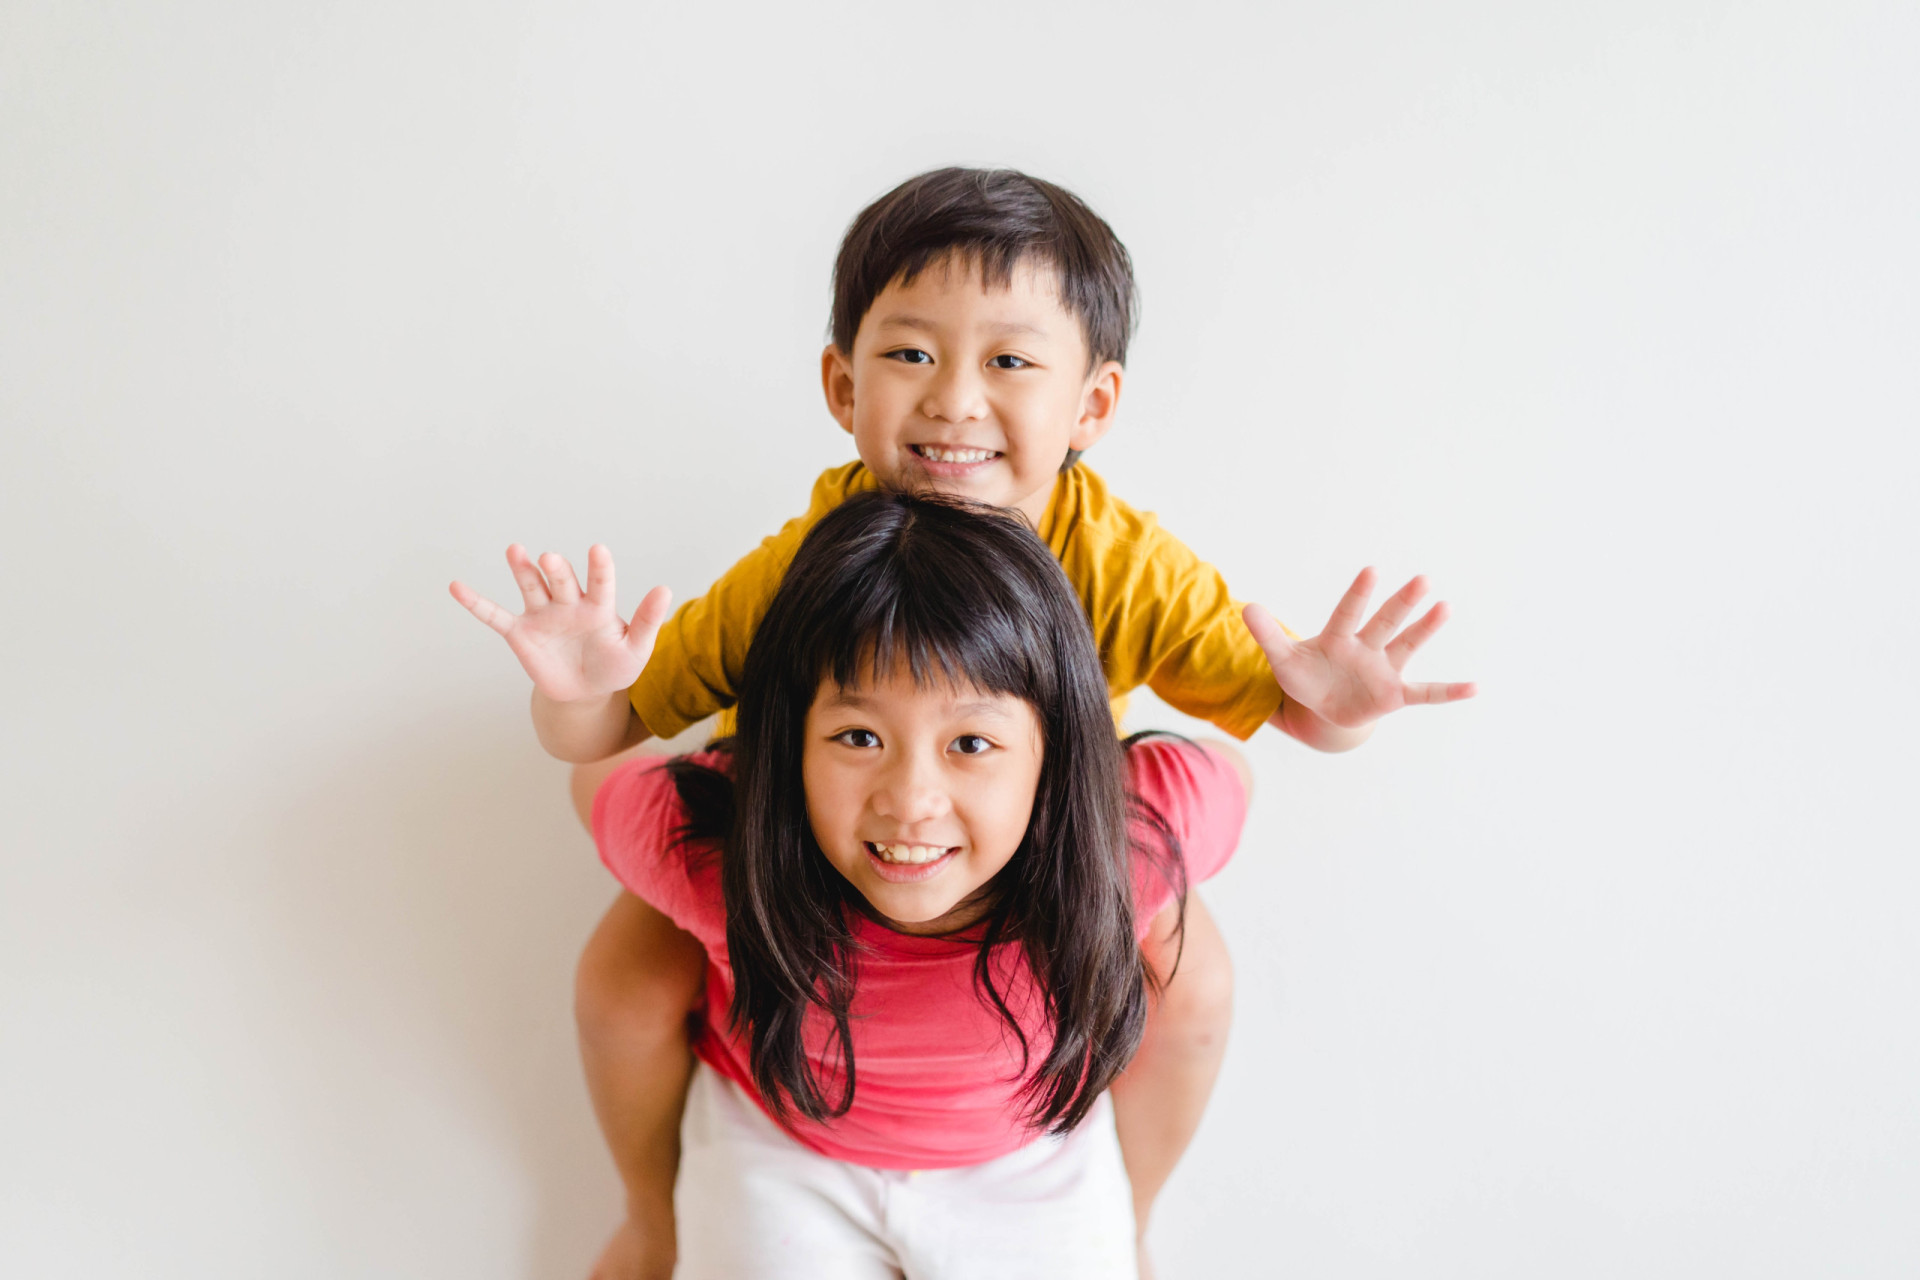 <p>Psychologists frequently look to birth order when examining a child's development, behavior patterns, and personality characteristics.</p><p><a href="https://www.msn.com/en-us/community/channel/vid-7xx8mnucu55yw63we9va2gwr7uihbxwc68fxqp25x6tg4ftibpra?cvid=94631541bc0f4f89bfd59158d696ad7e">Follow us and access great exclusive content every day</a></p>